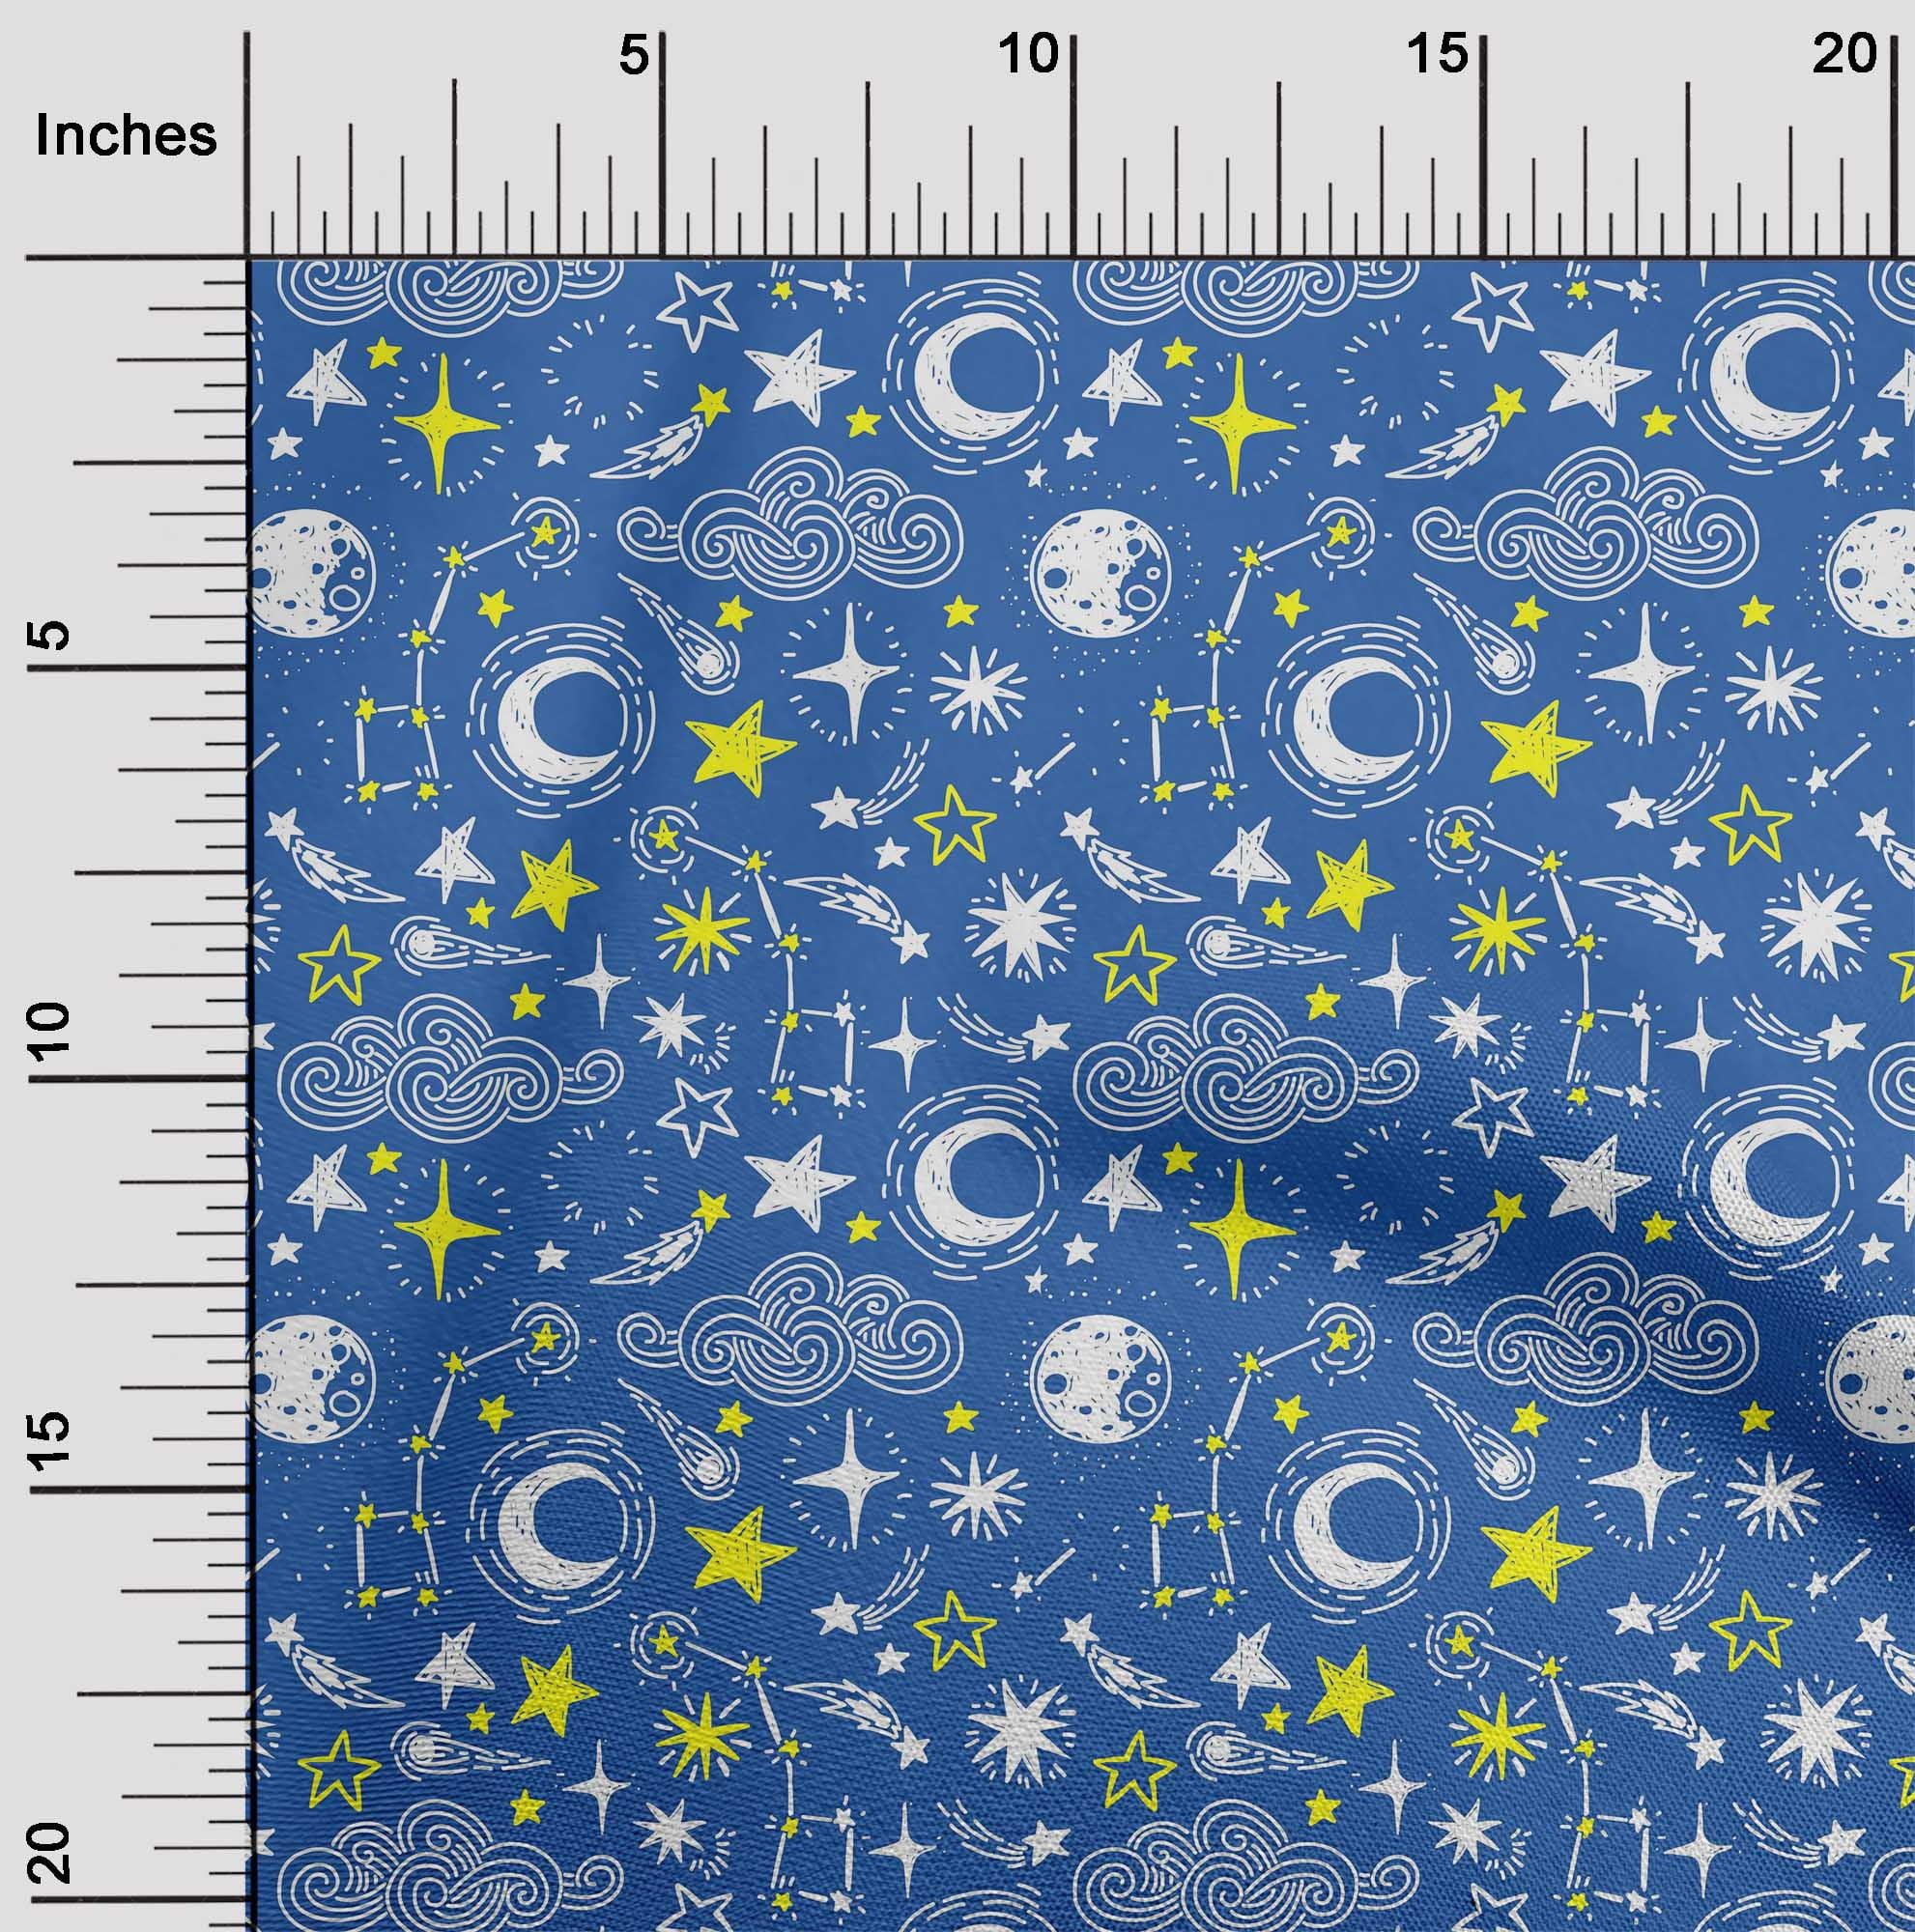 Sweets cotton 100% Printed Cotton candy fabric Eco-print Width 150cm /60